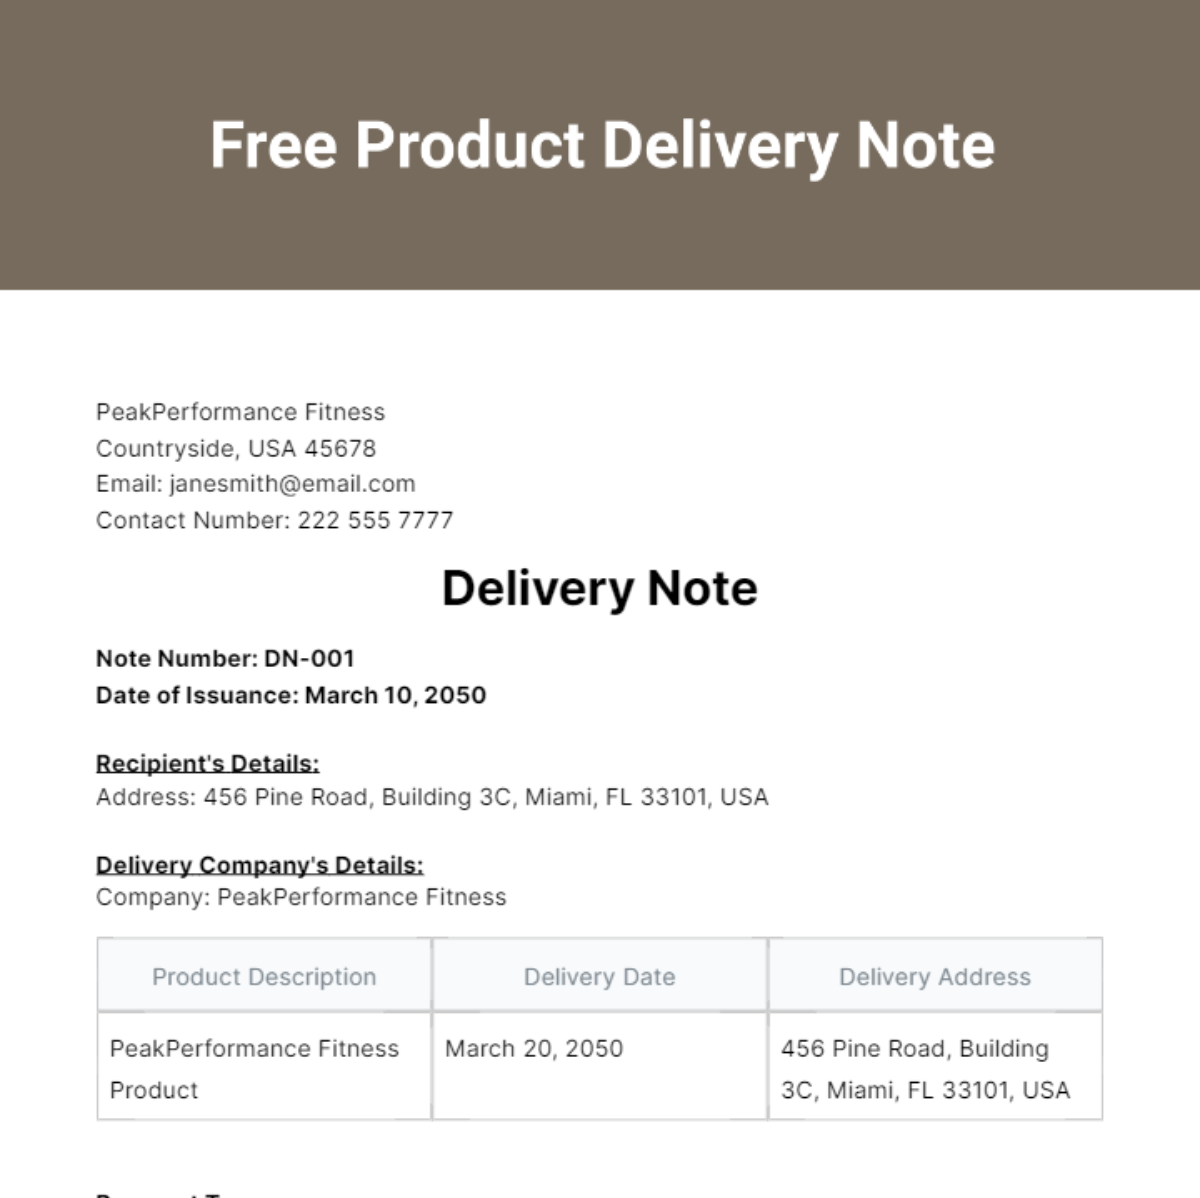 Free Product Delivery Note Template